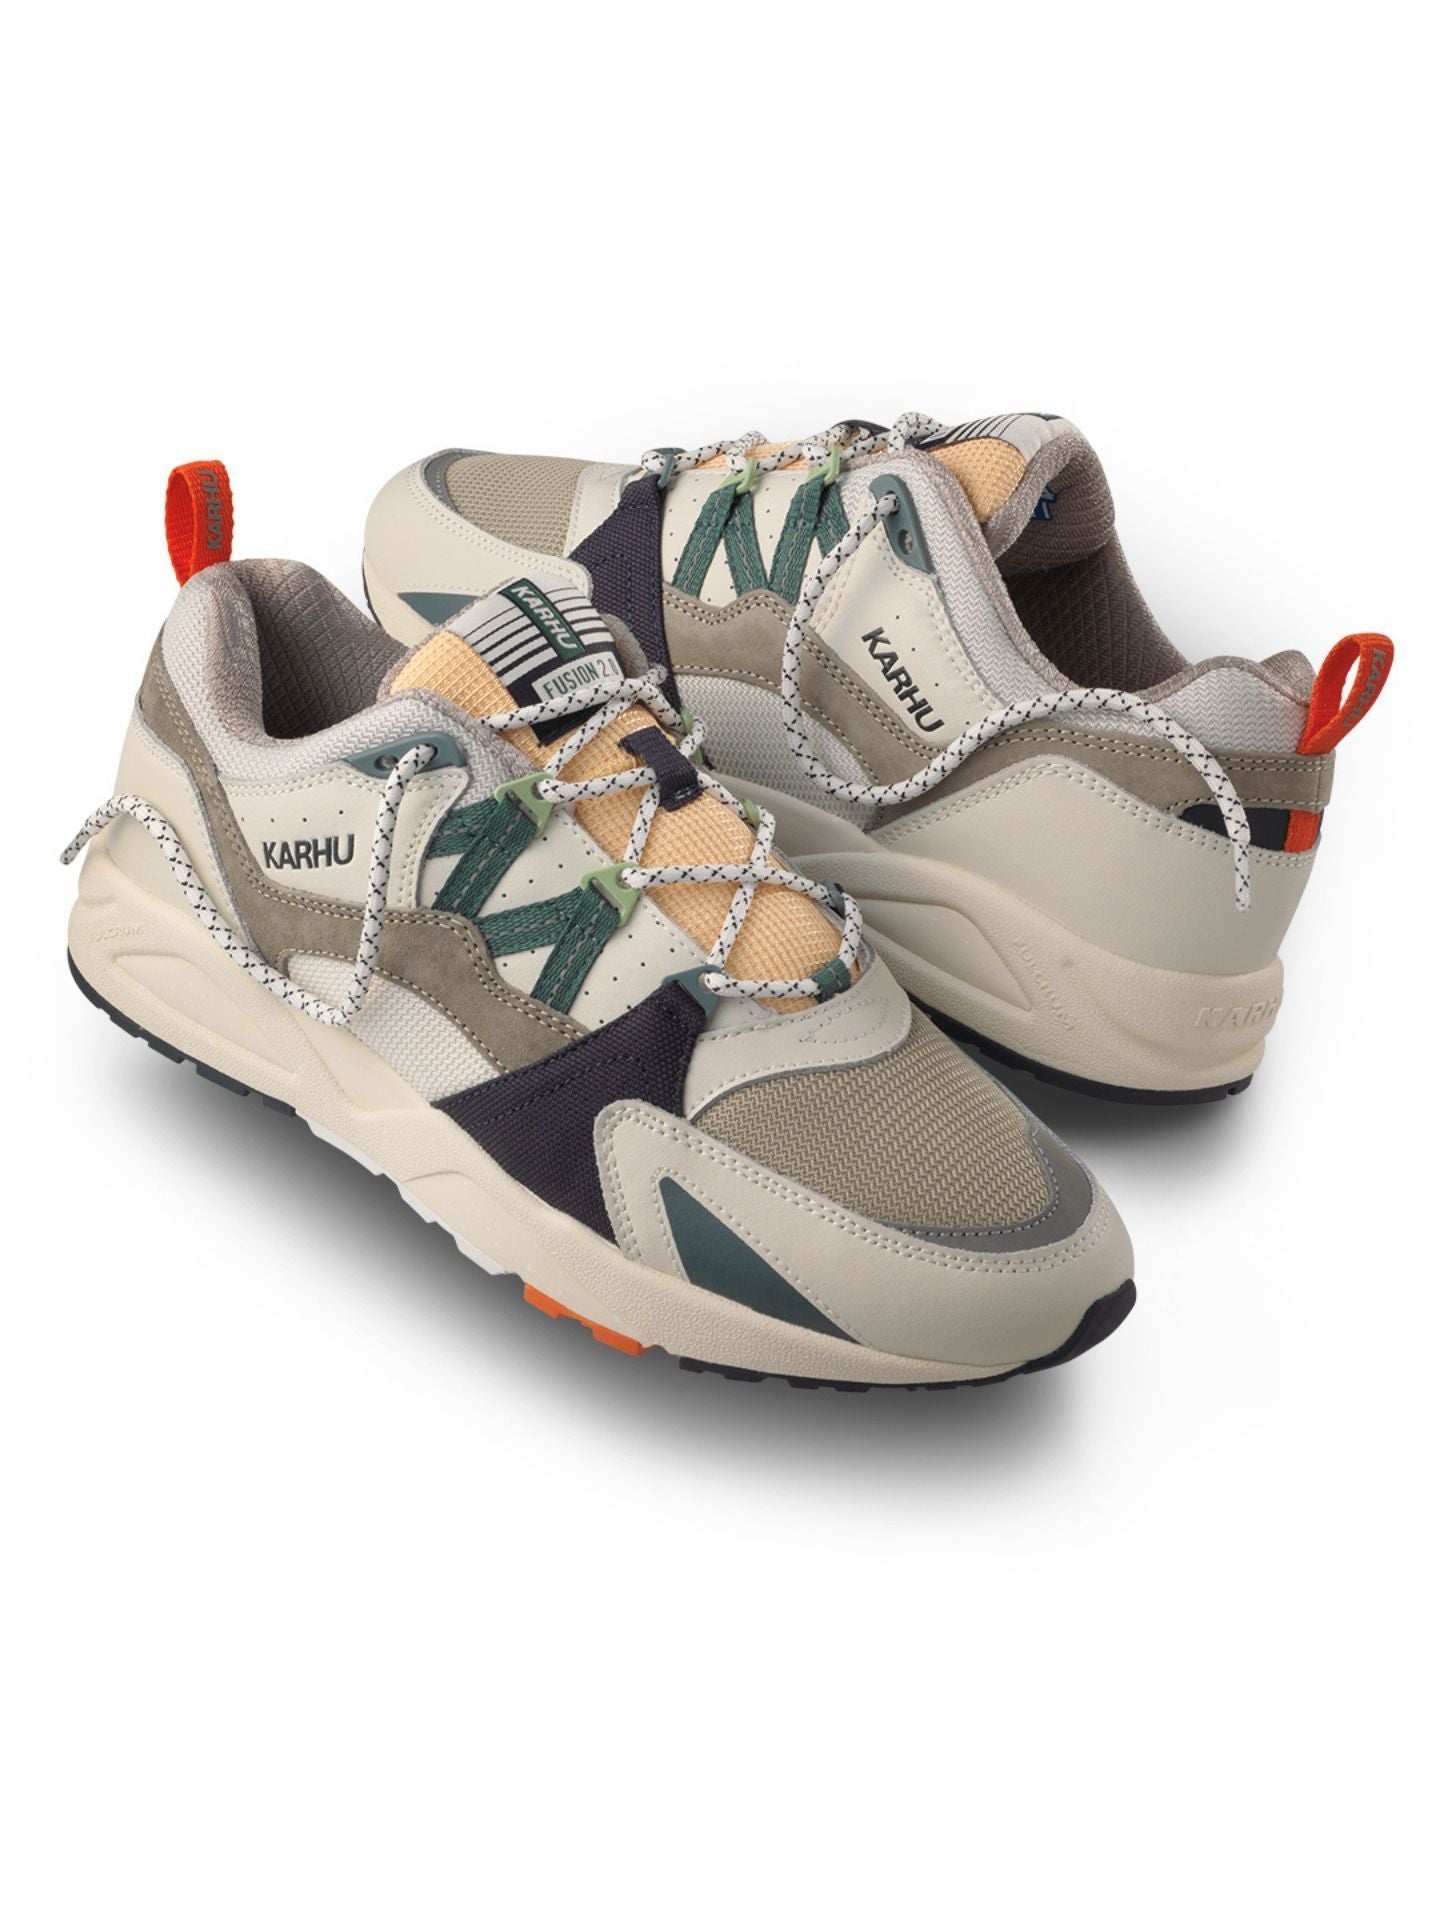 Karhu fusion 2.0 The Forest Rules F804140